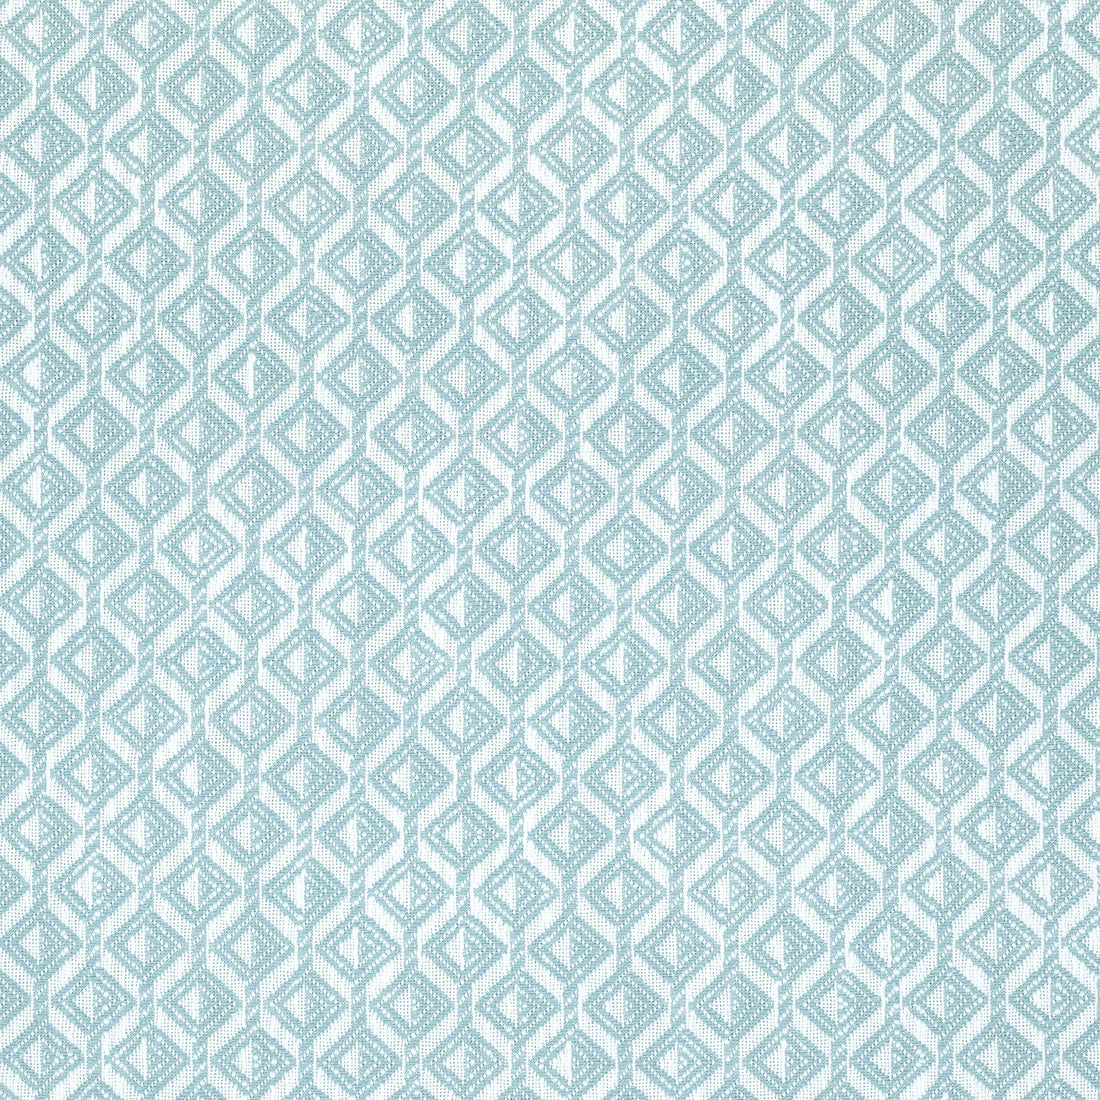 Trion fabric in aqua color - pattern number W73457 - by Thibaut in the Landmark collection